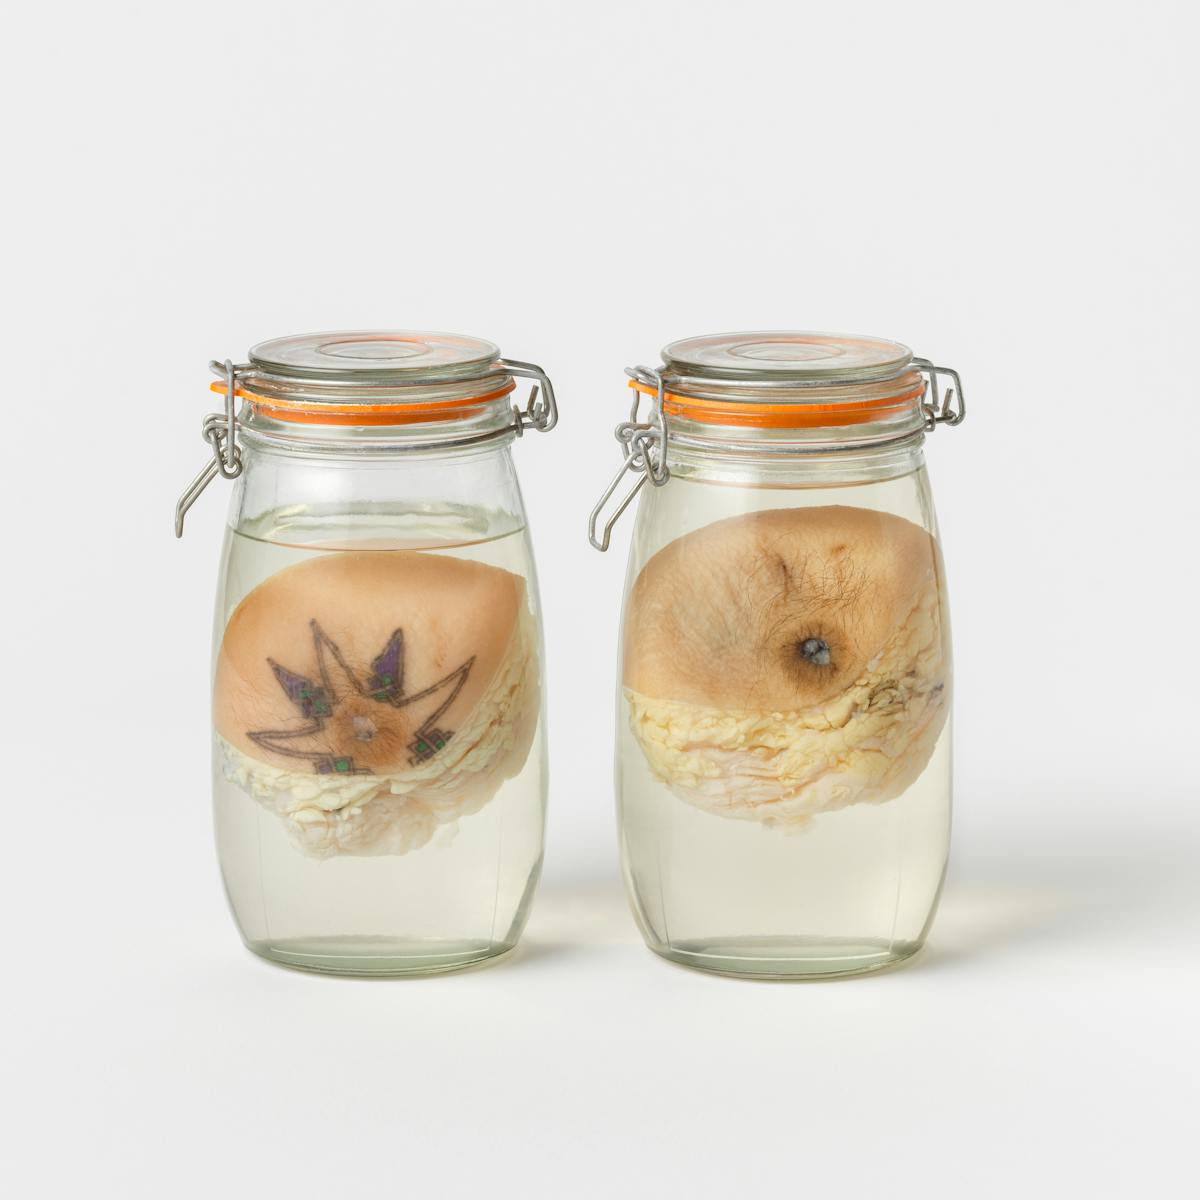 Photograph of 2 Vogue clip top jars containing breast tissue preserved in a liquid. The breast tissue in the jar on the left shows a tattoo around the nipple in a star shape. The breast tissue in the jar on the right show hair around the nipple.